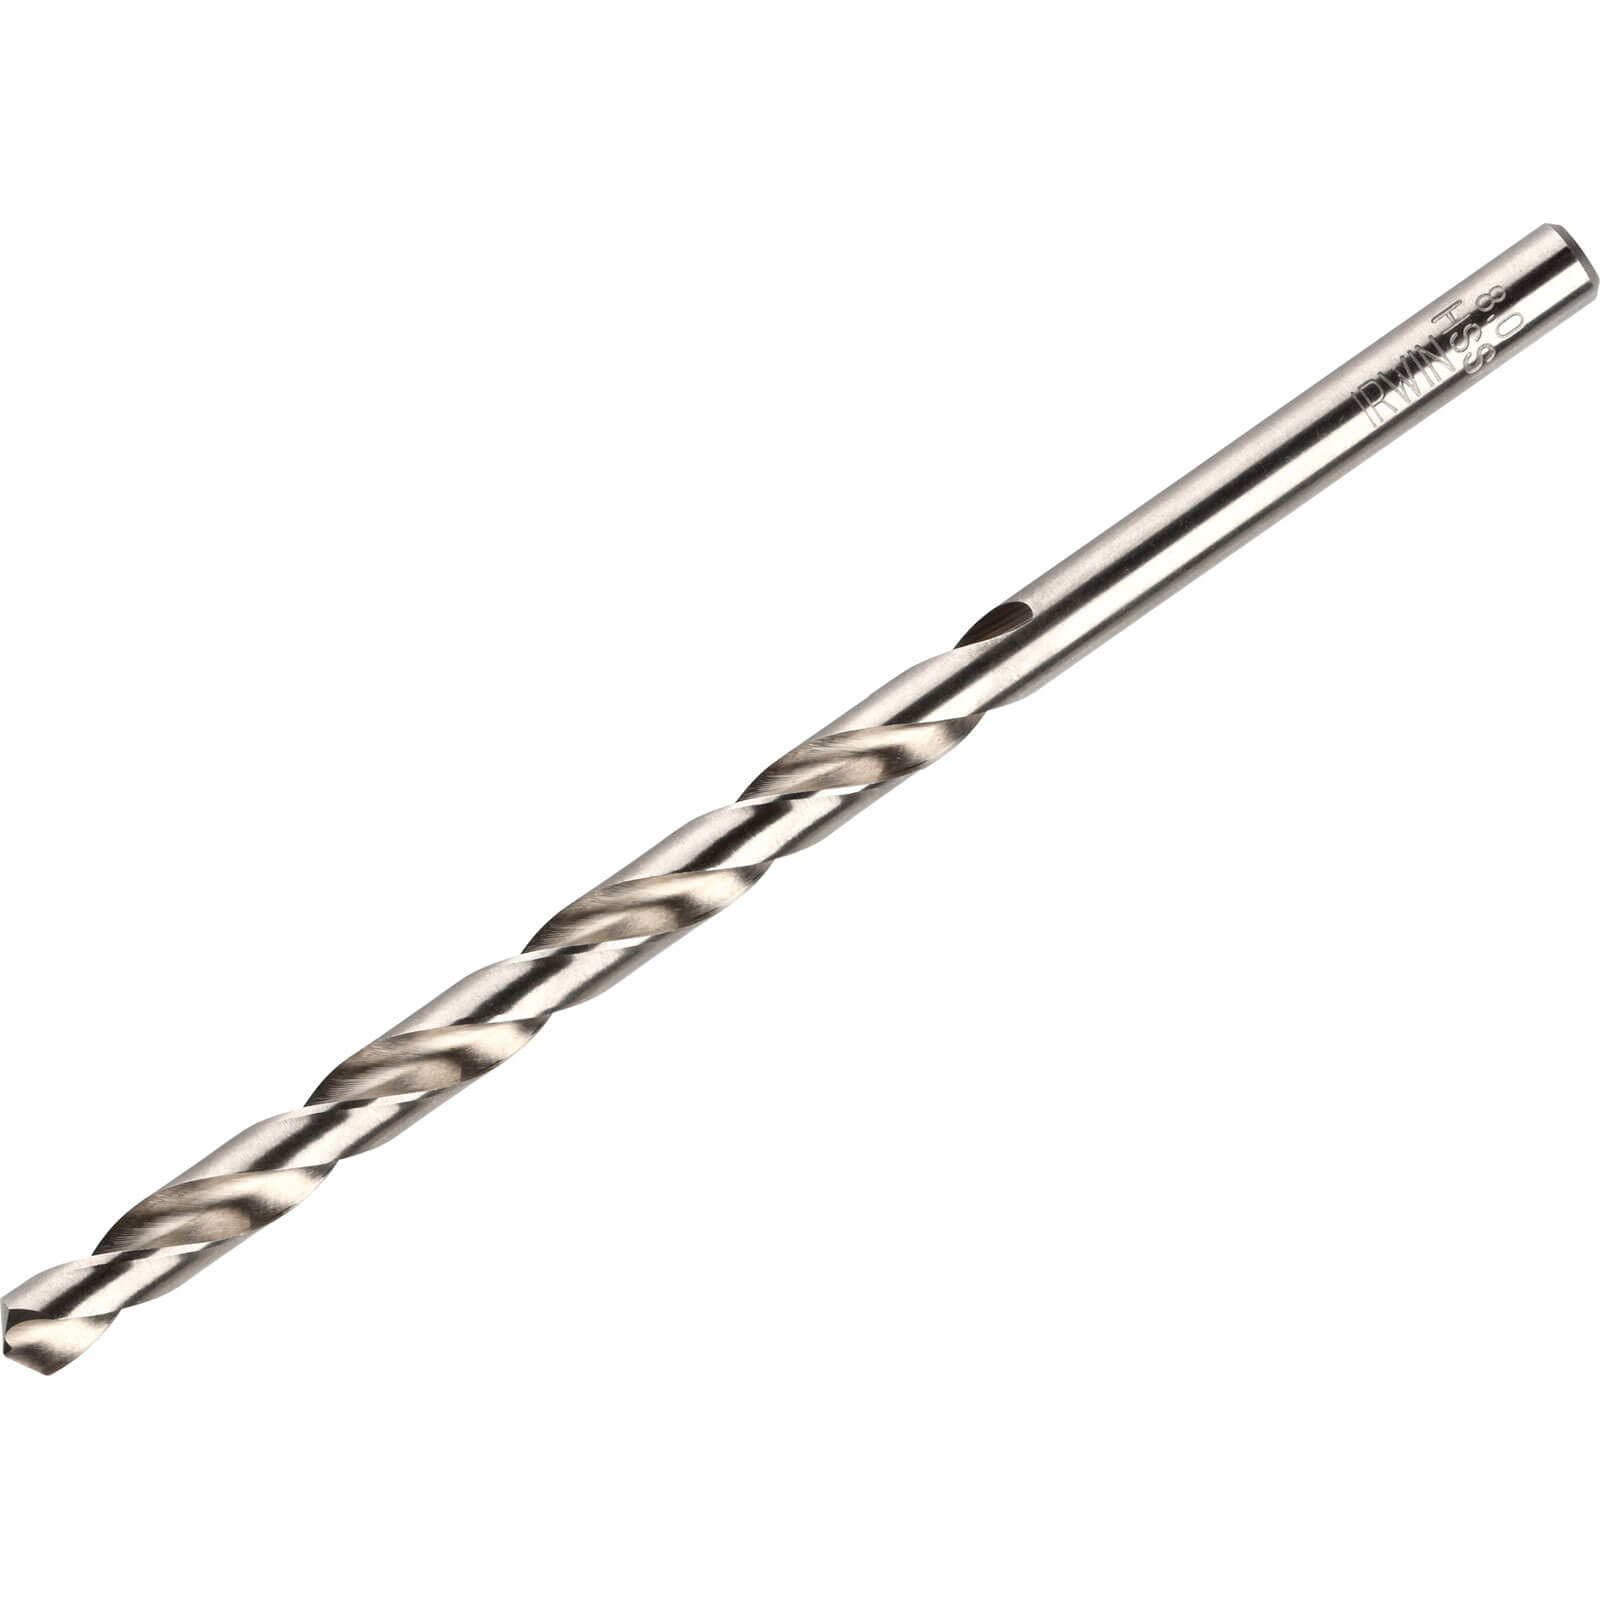 Image of Irwin HSS Long Pro Drill Bits 5mm Pack of 10